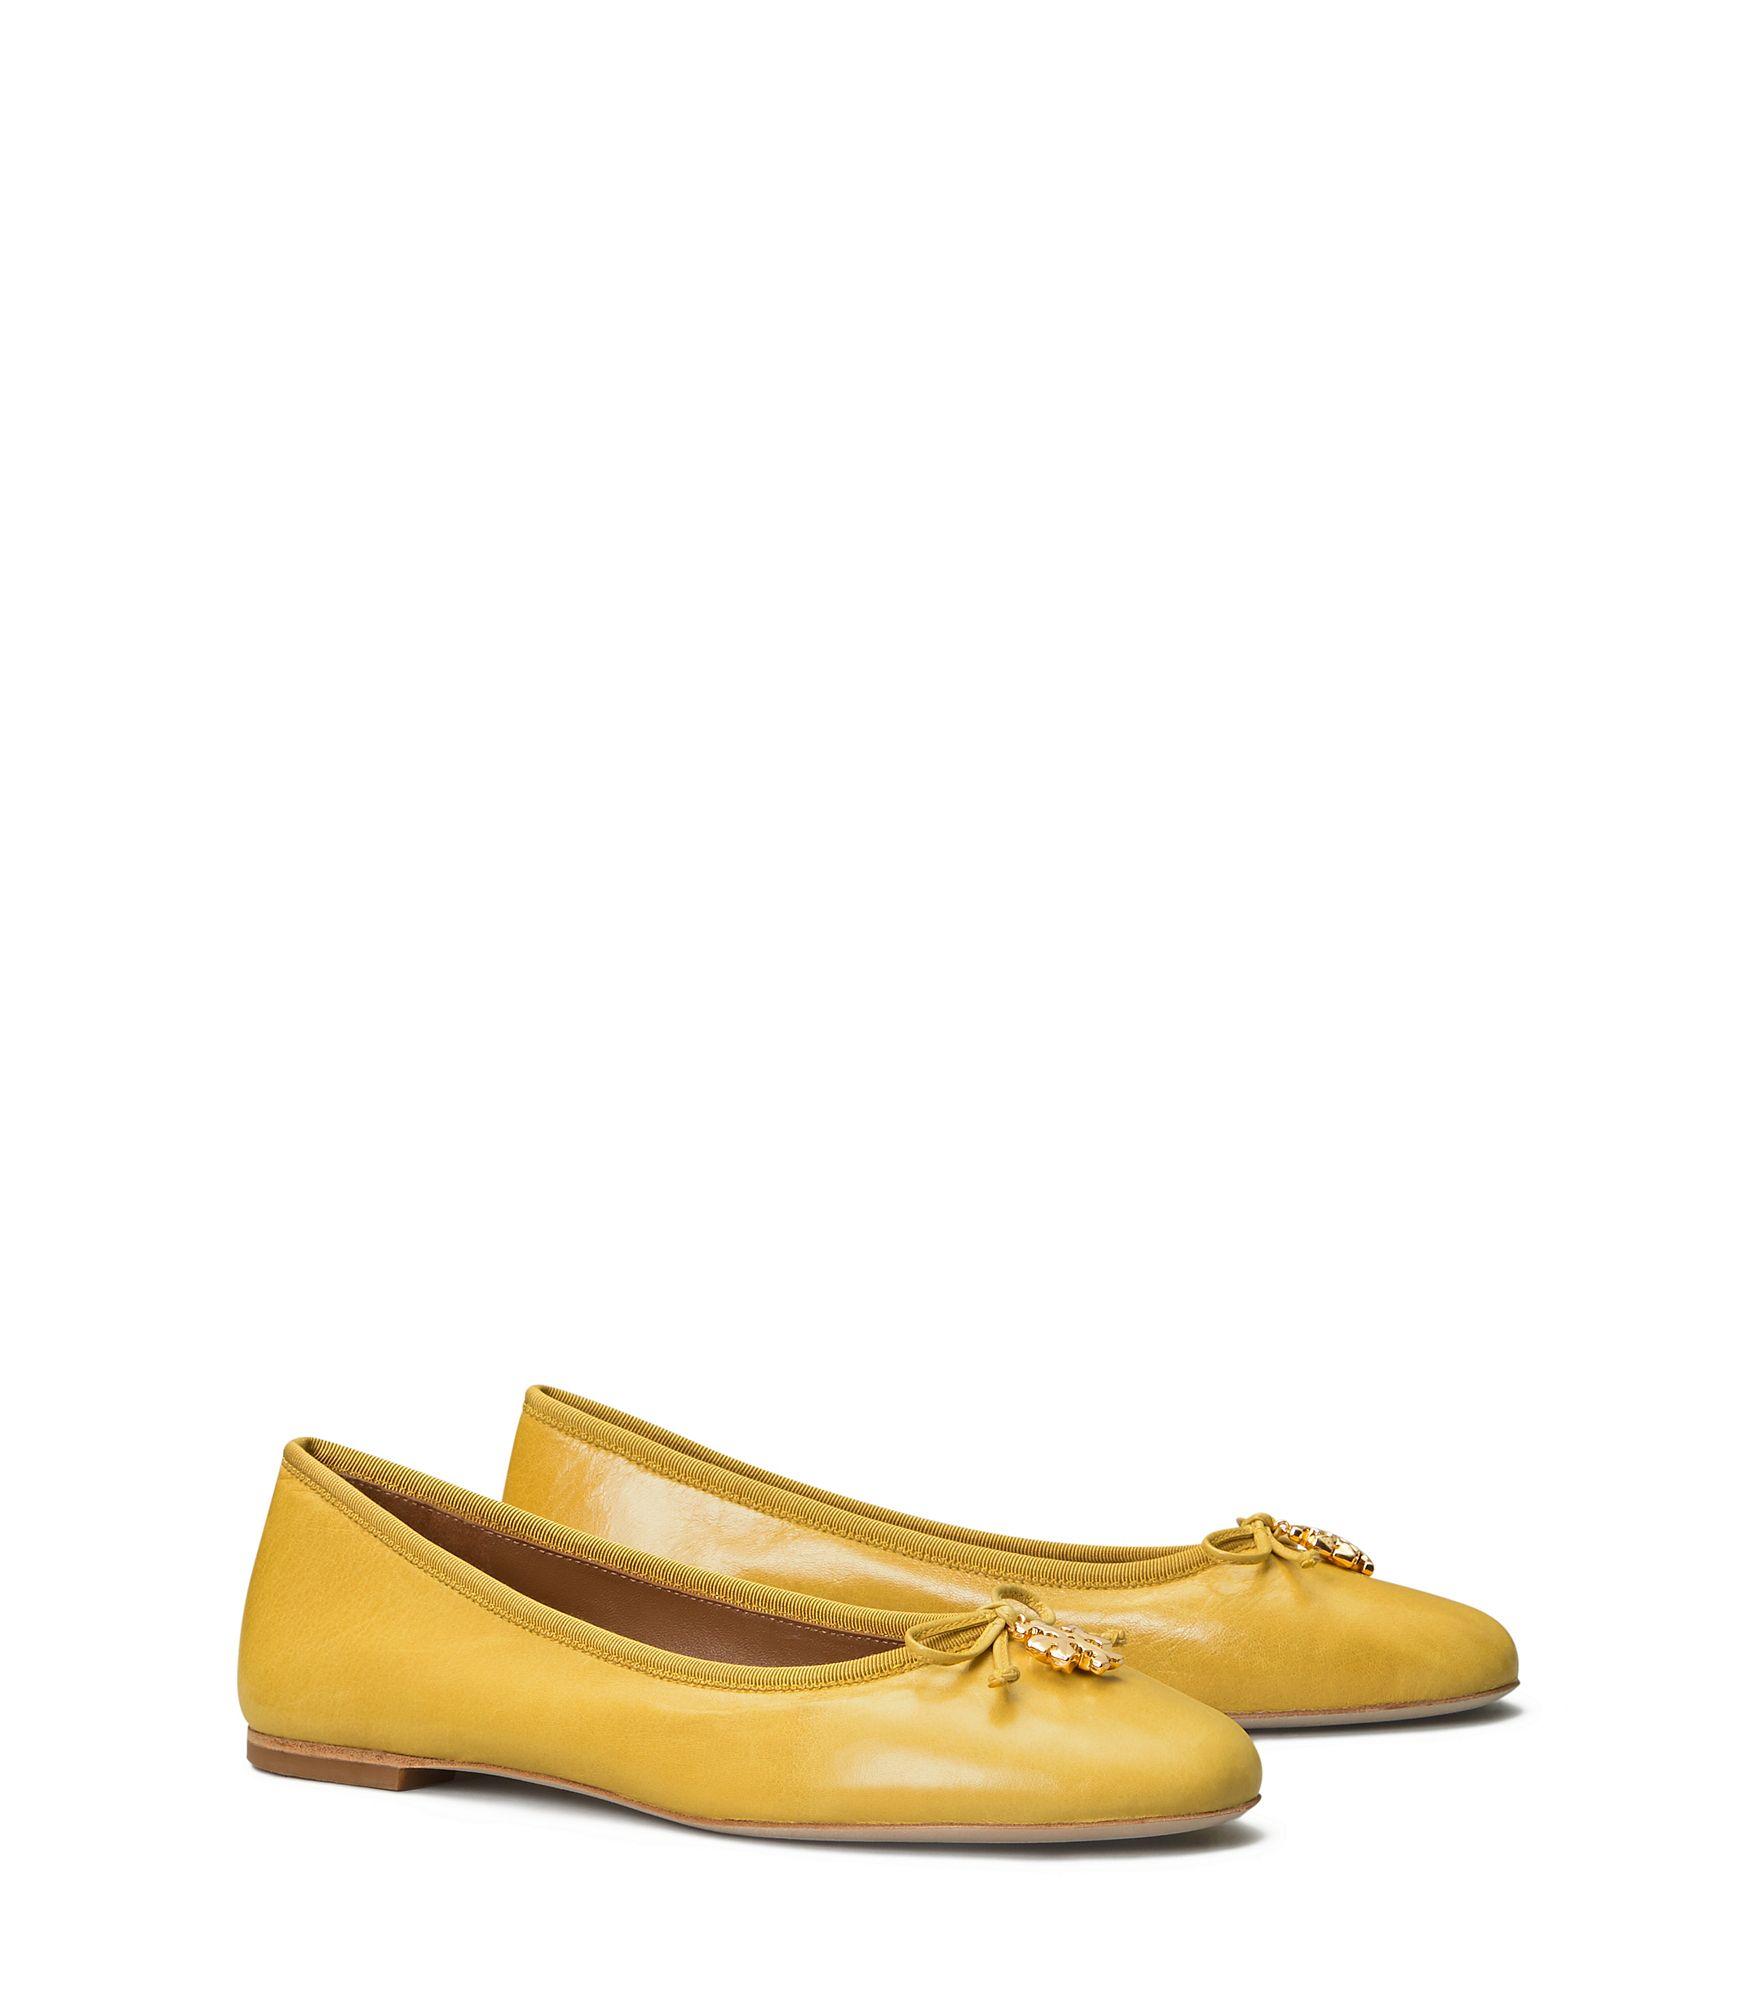 Tory Burch Tory Charm Ballet Flat in Yellow | Lyst Canada